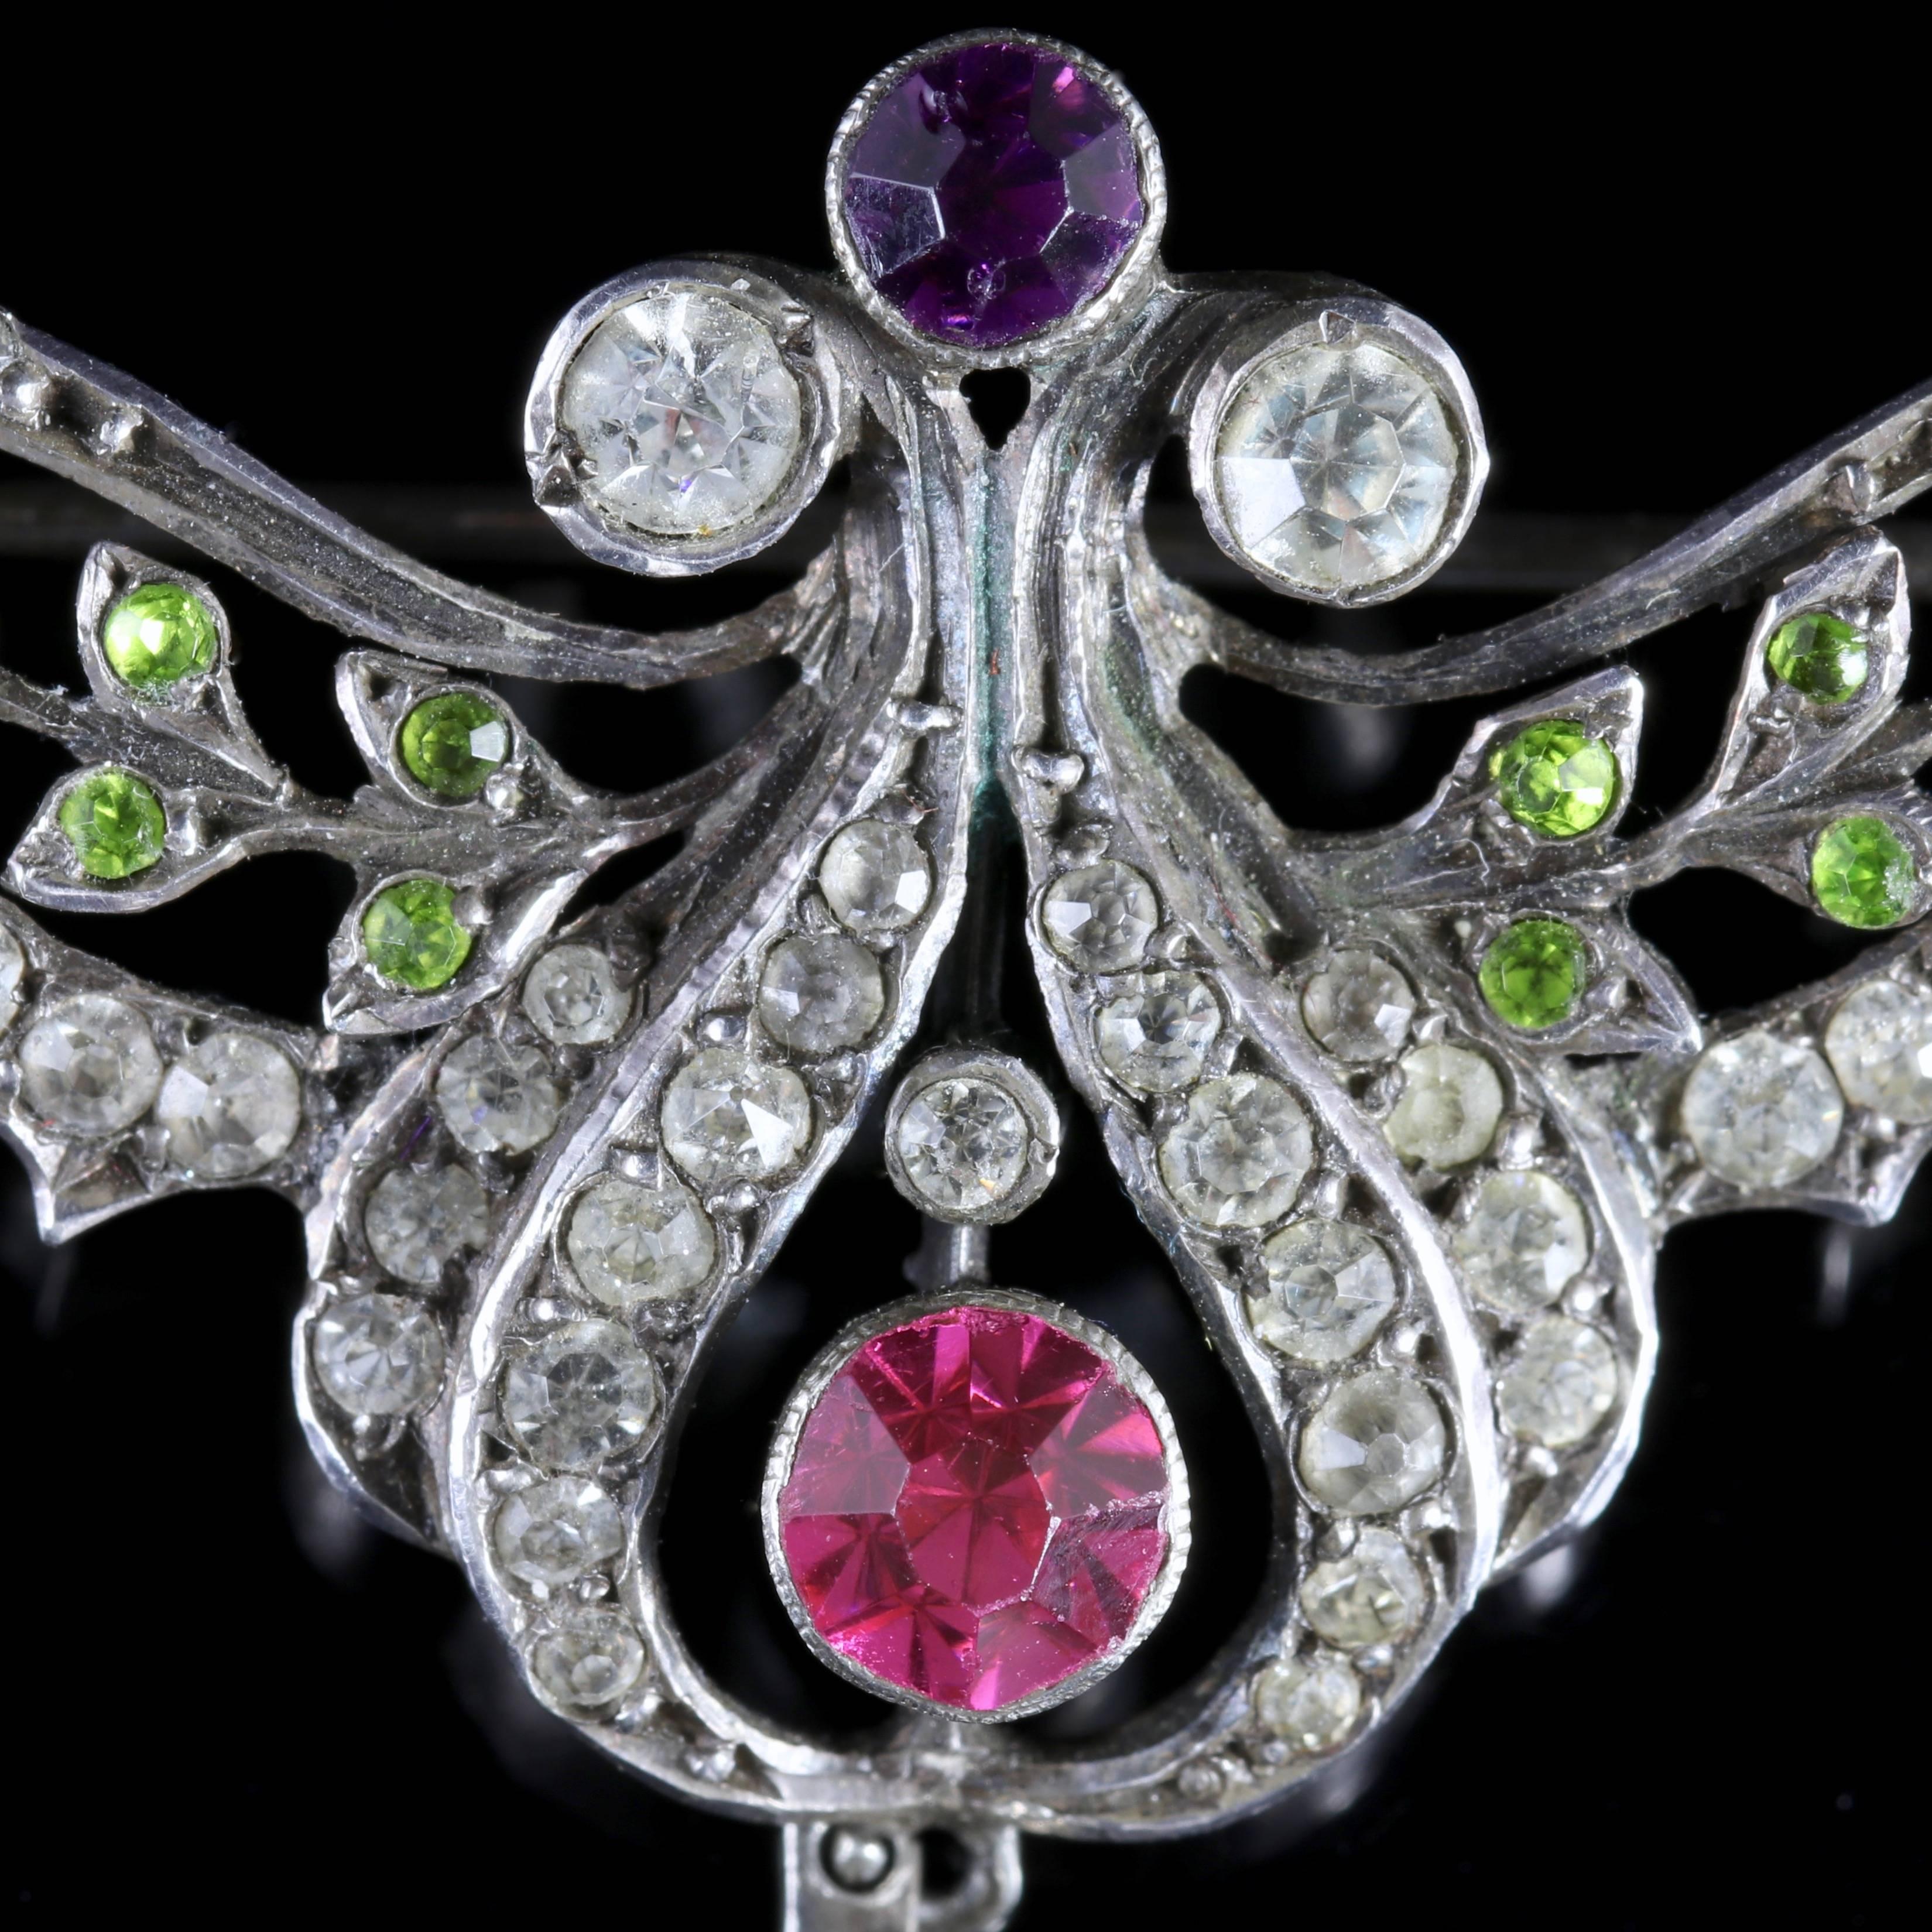 To read more please click continue reading below-

This fabulous Sterling Silver Victorian Paste brooch is a genuine Suffragette piece, Circa 1900.

Emmeline Pankhurst was the leader of the British Suffragette movement in the 19th century and fought